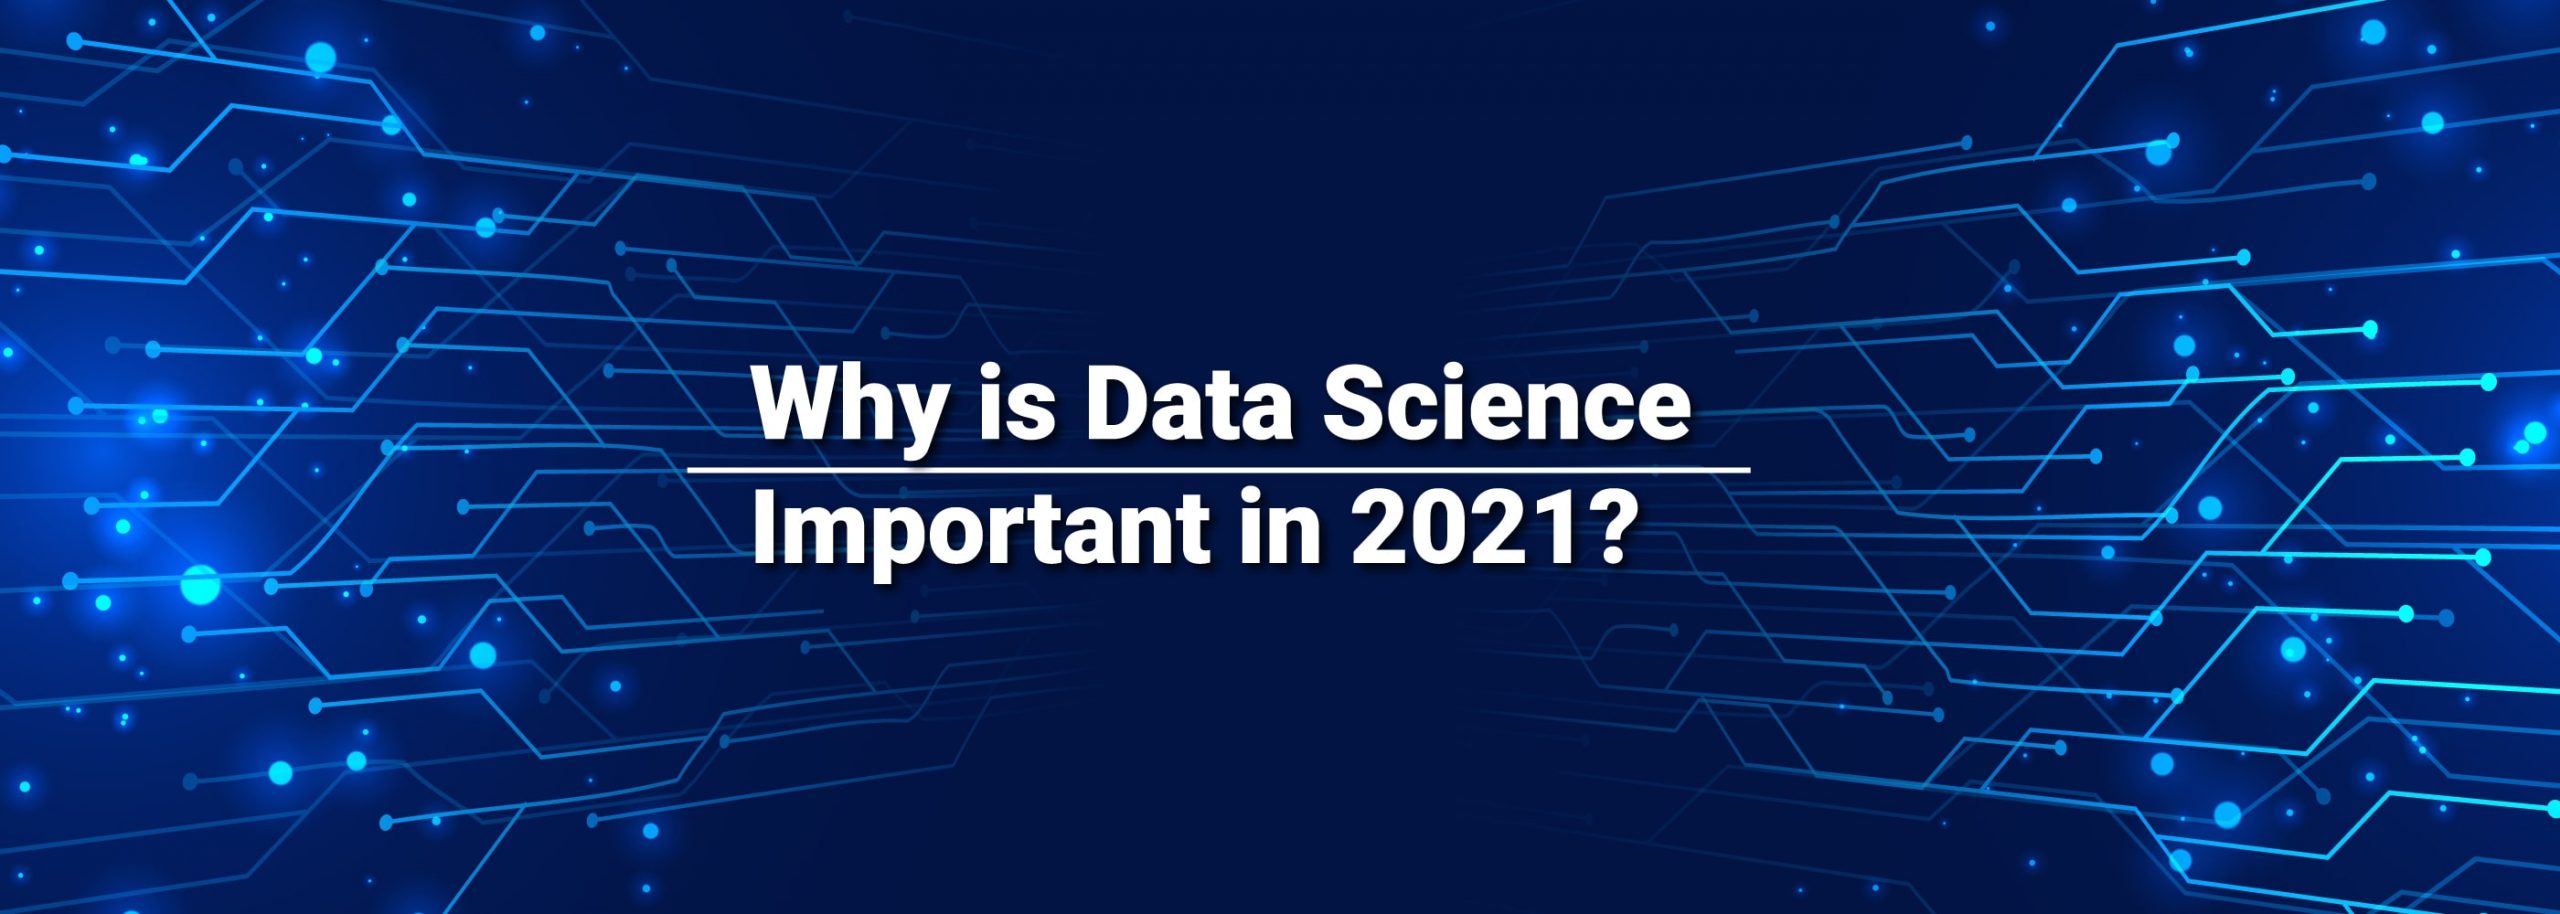 Why is Data Science Important in 2021